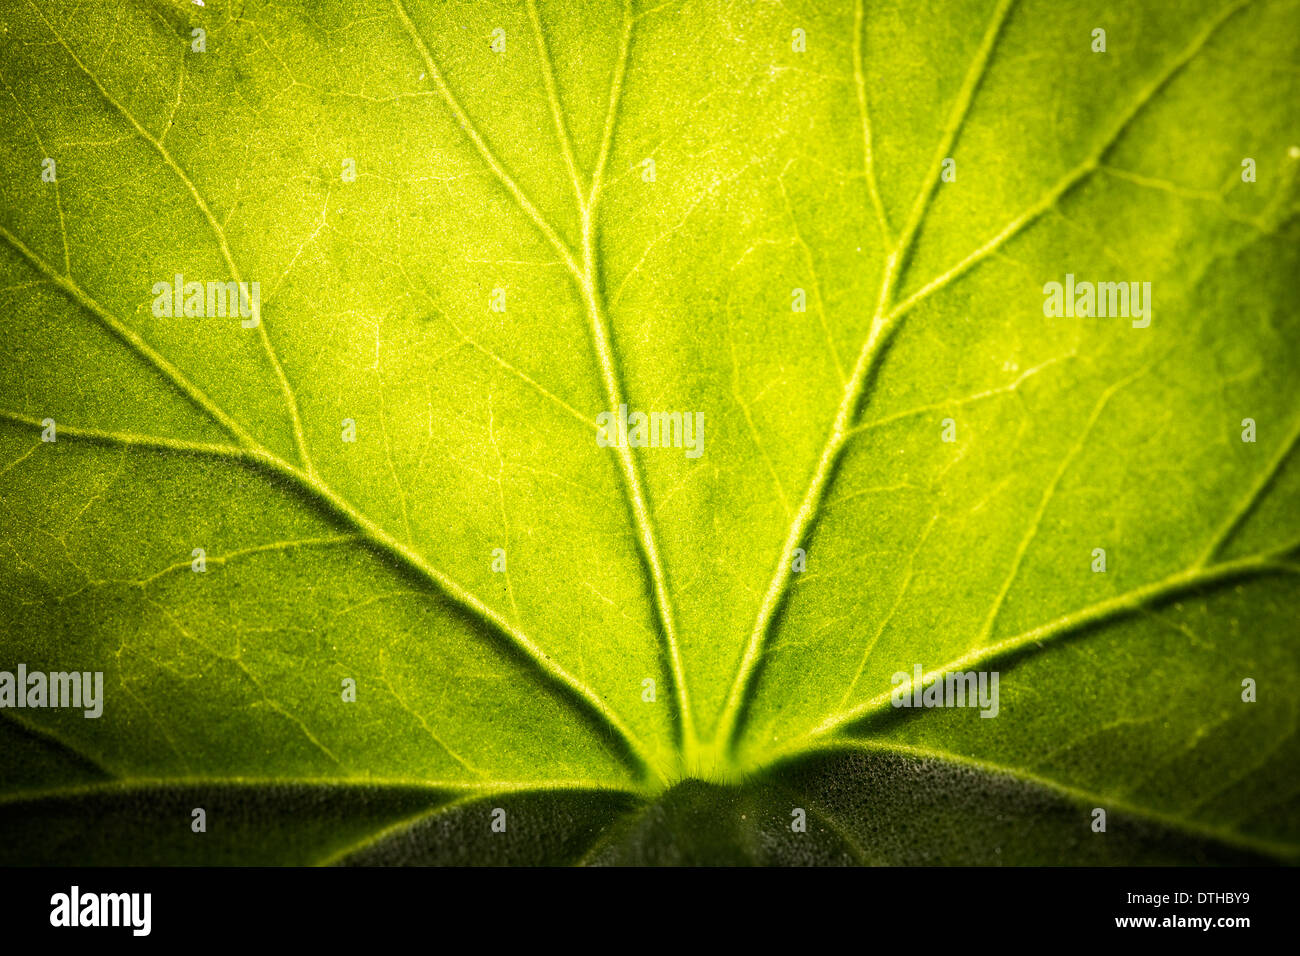 leaf texture close up. Green background Stock Photo